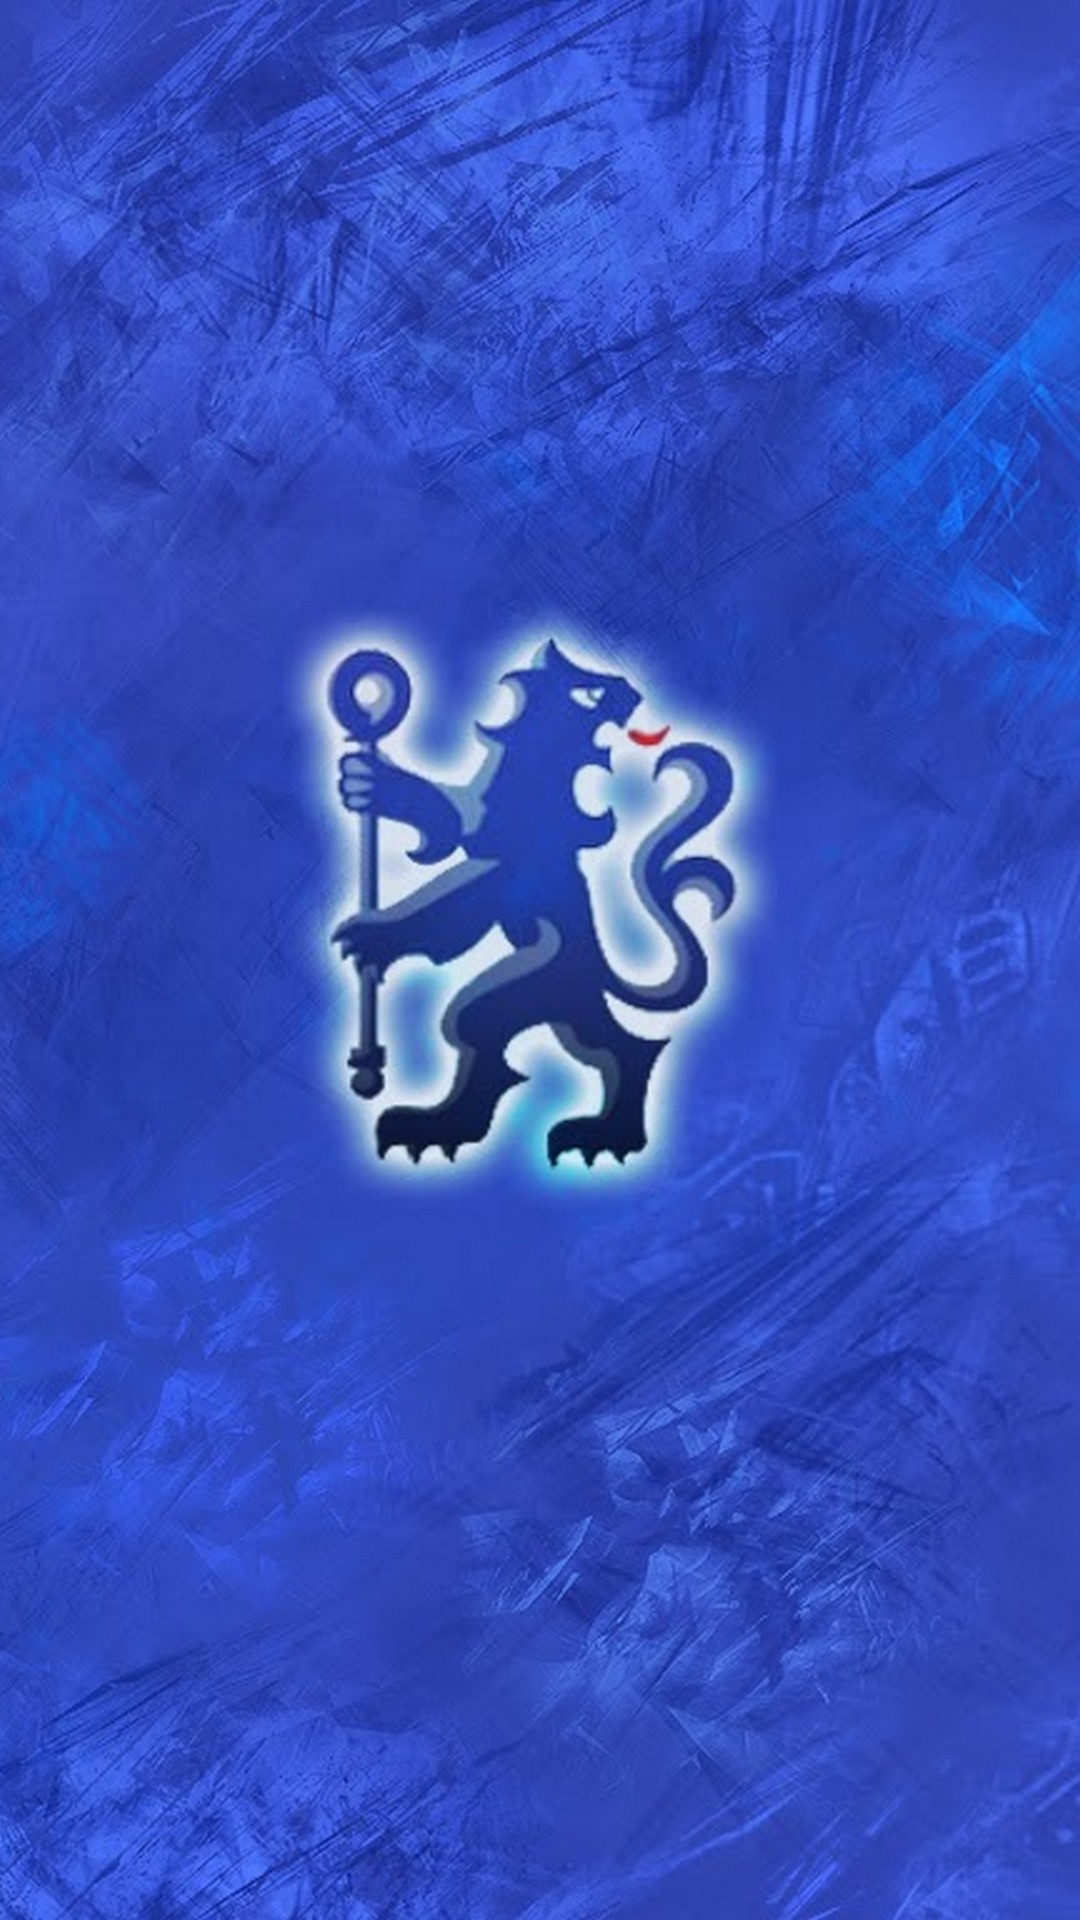 Chelsea Football Wallpaper Iphone Hd With Resolution - Chelsea Fc - HD Wallpaper 